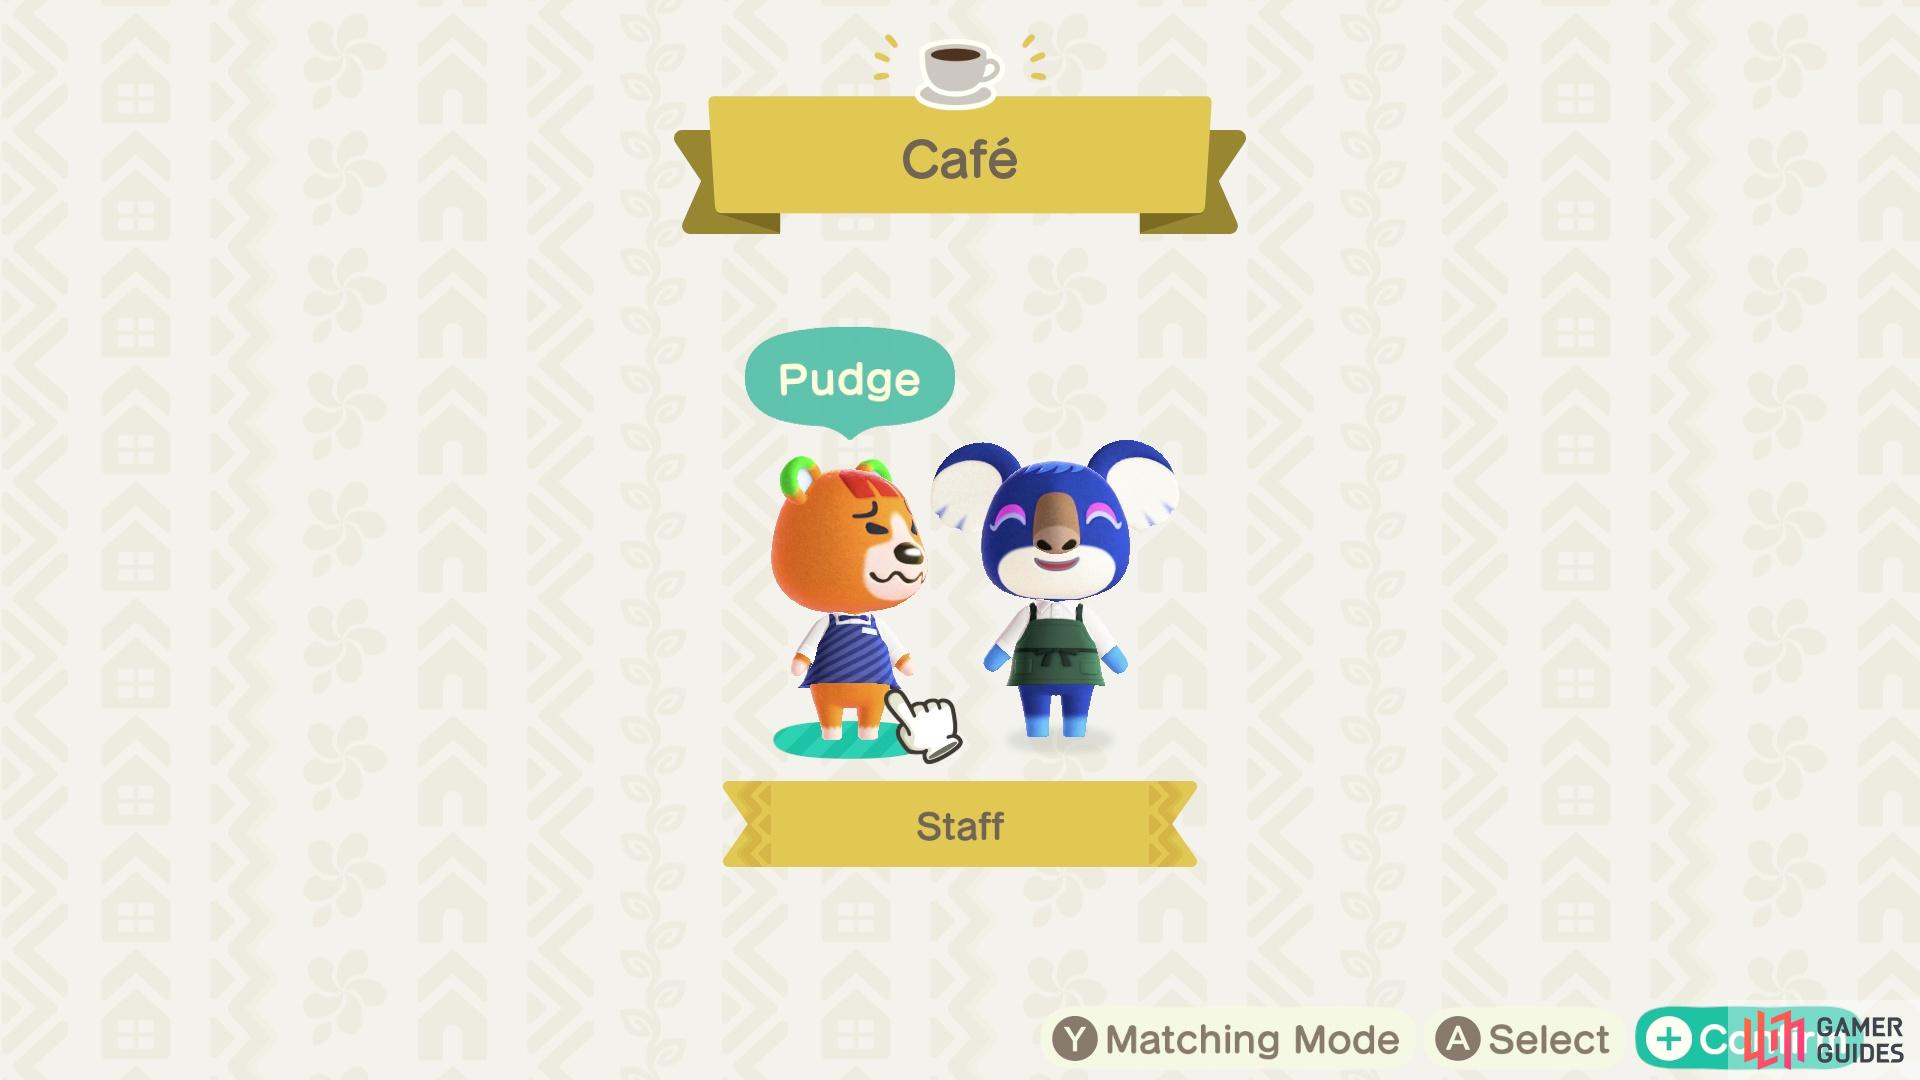 Choose who you'd like to work at the Café